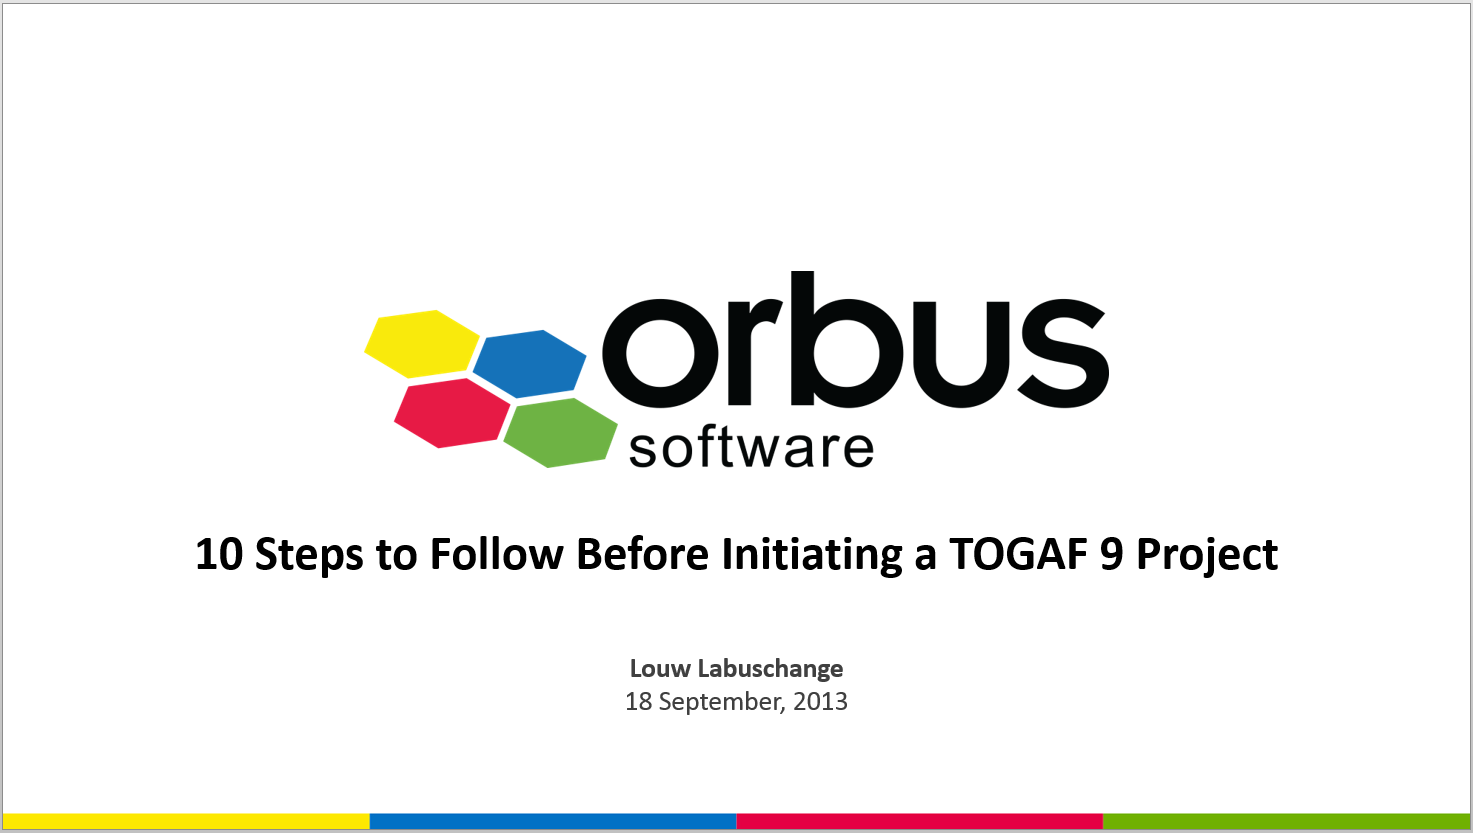 10-steps-to-follow-before-initiating-a-togaf-9-project